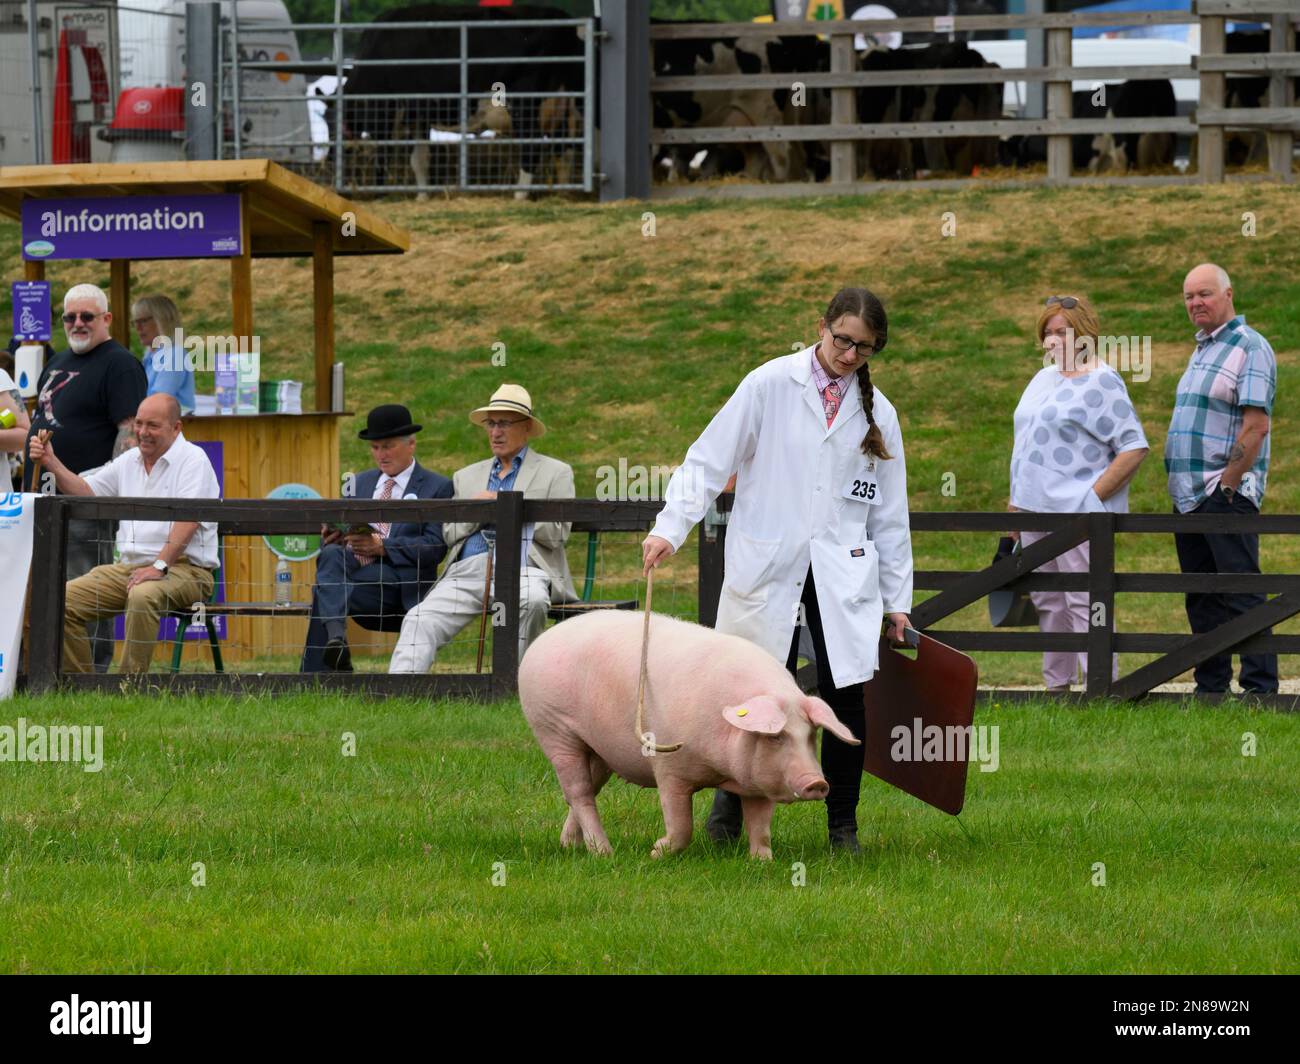 Pedigree purissimo-bred bianco gallese maiale (cinghiale di scrofa) e handler Walk in showring (People watching) - Great Yorkshire Agricultural Show, Harrogate, England UK. Foto Stock